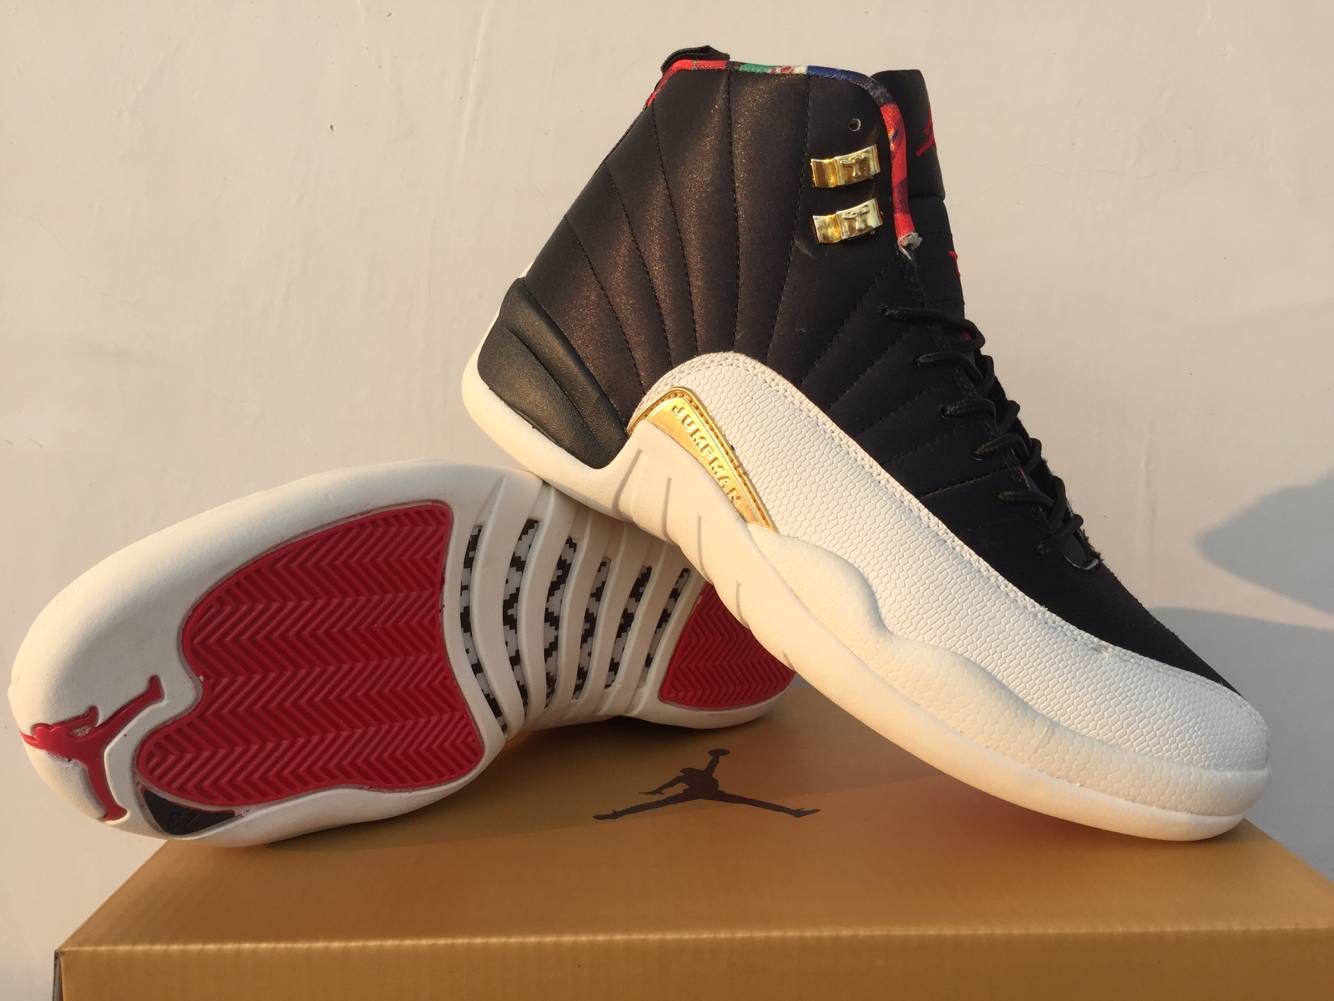 New Air Jordan 12 Pig Year of CNY Black Gold Colorful Shoes